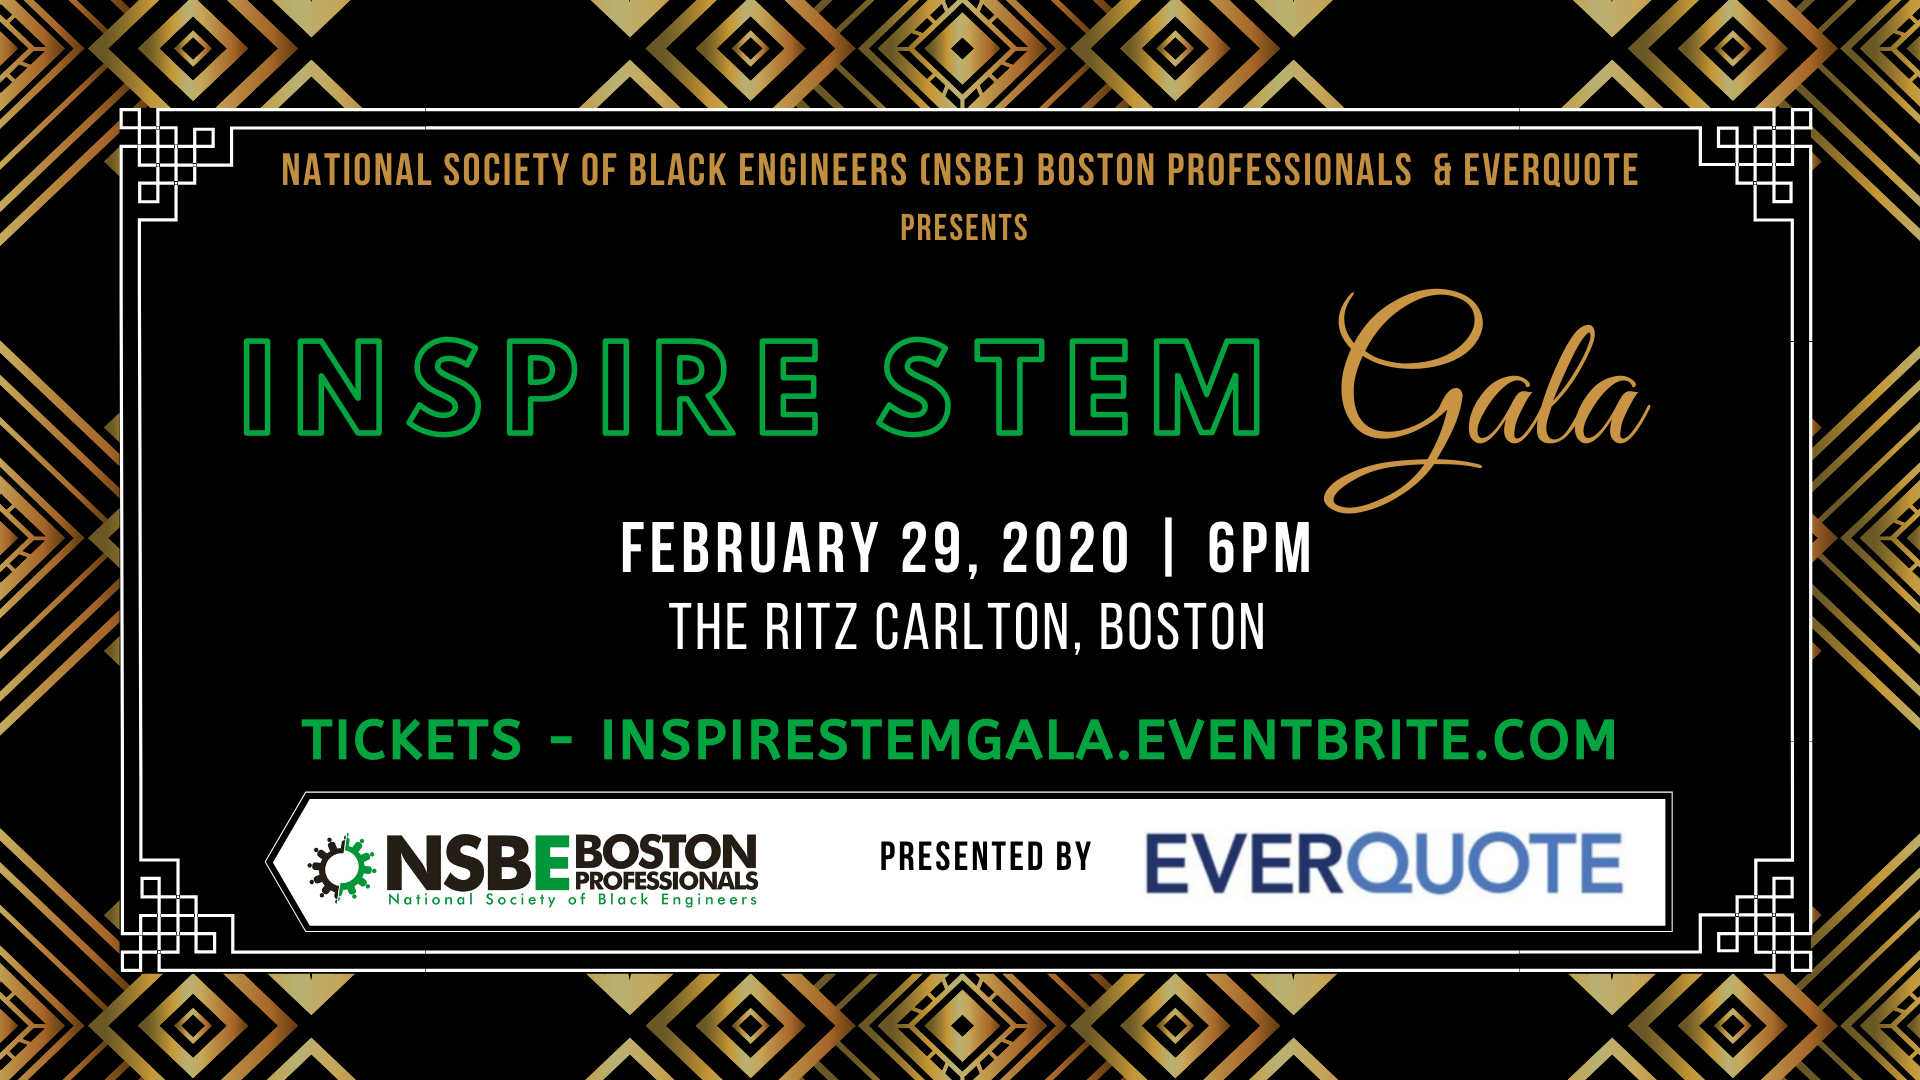 INSPIRE STEM Gala presented by NSBE Boston & EverQuote